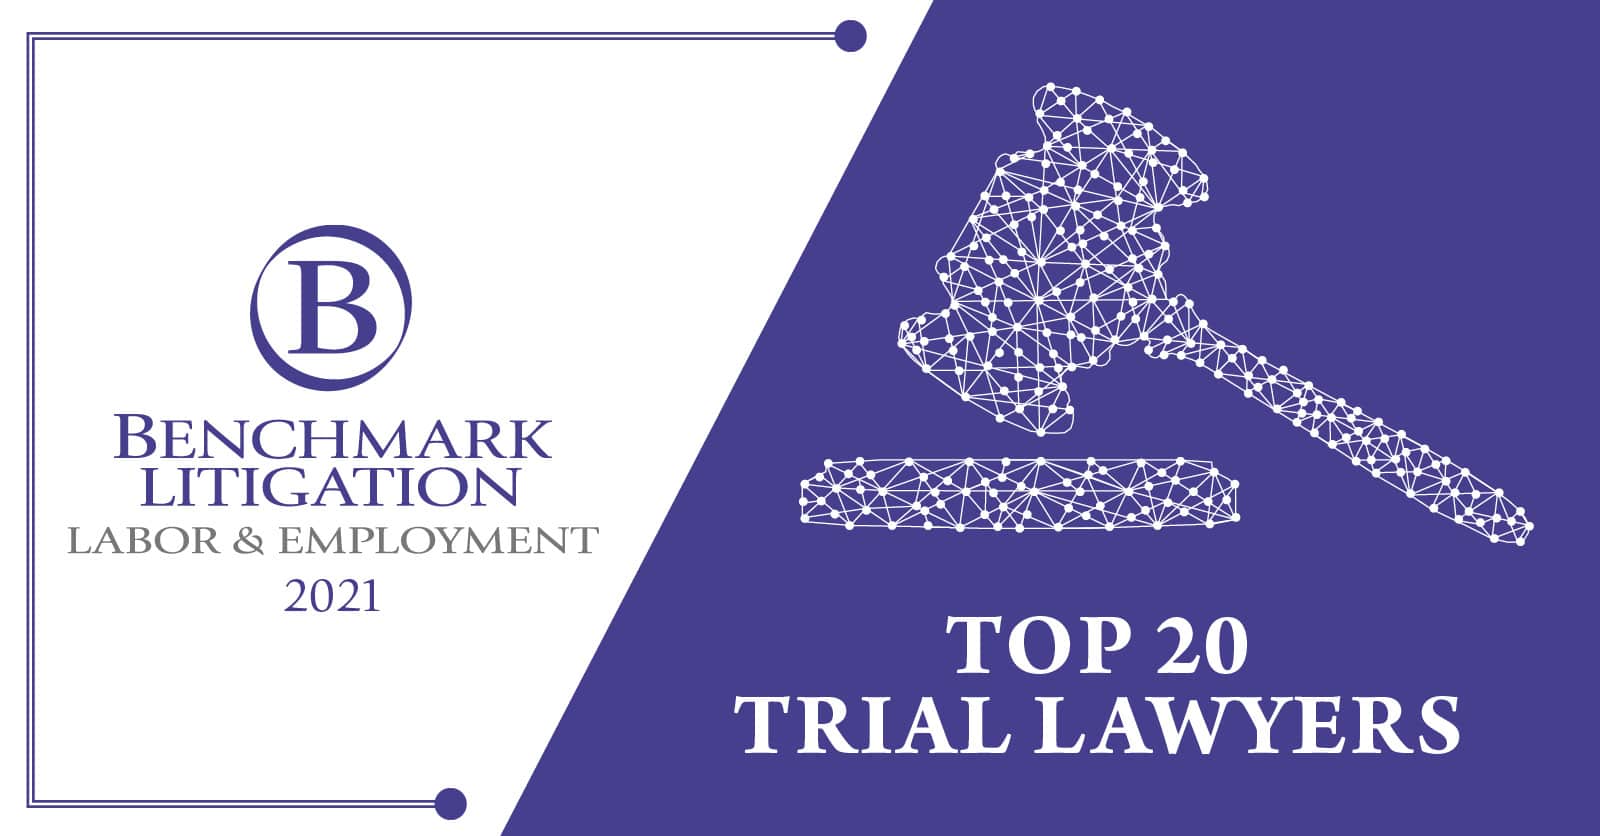 Benchmark Litigation Labor & Employment 2021, Top 20 Trial Lawyers